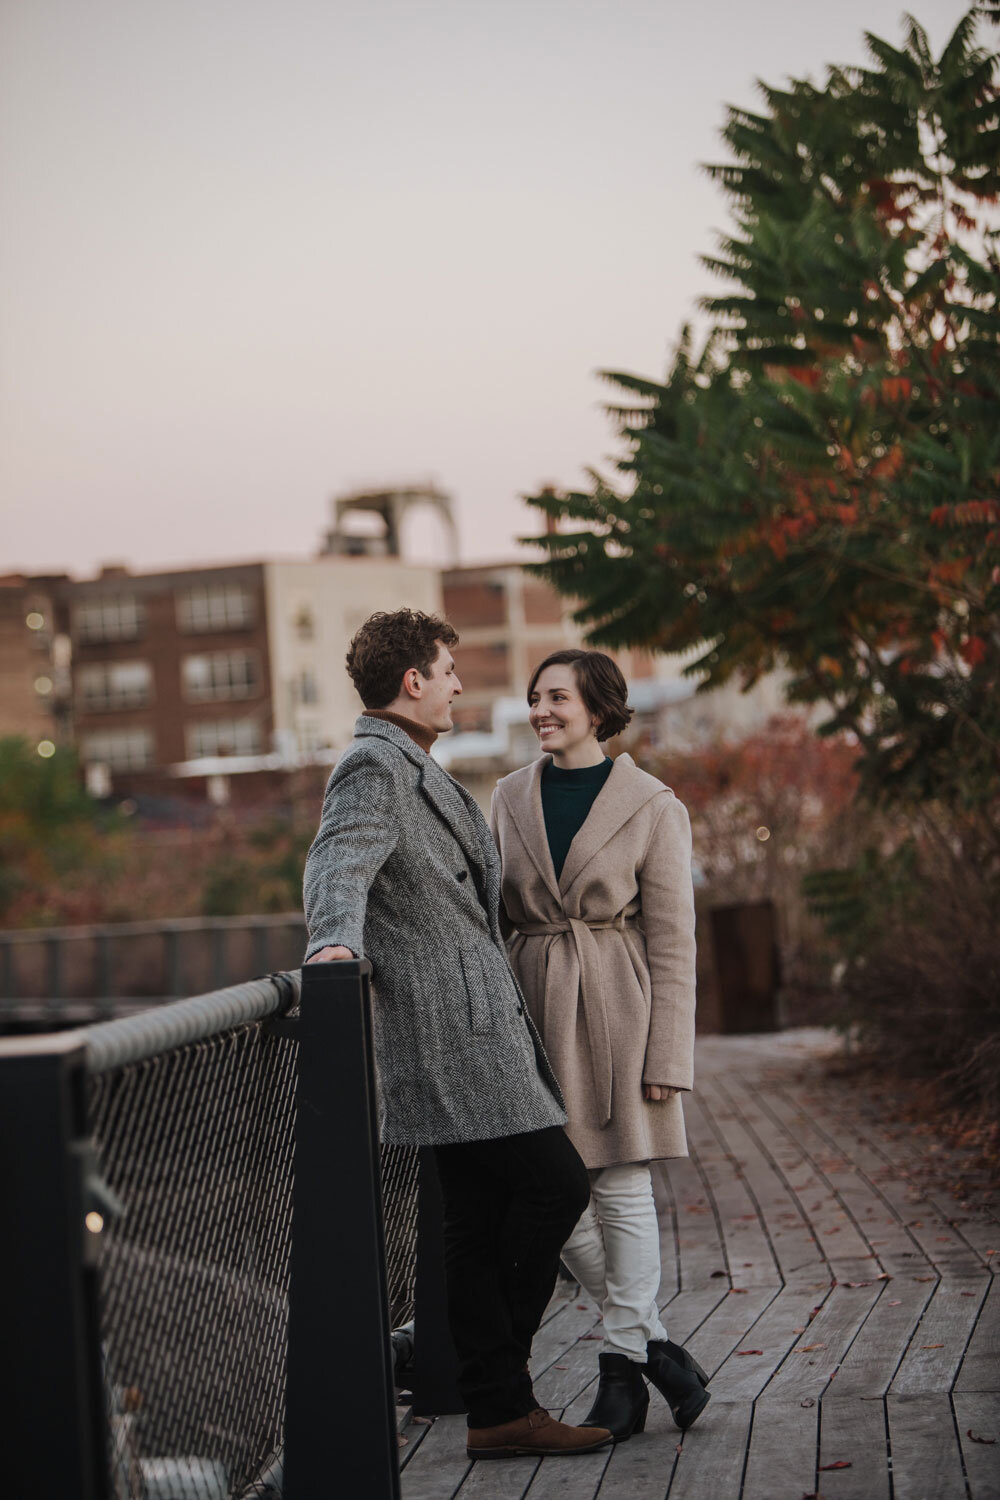 An engaged couple getting photographed at sunrise